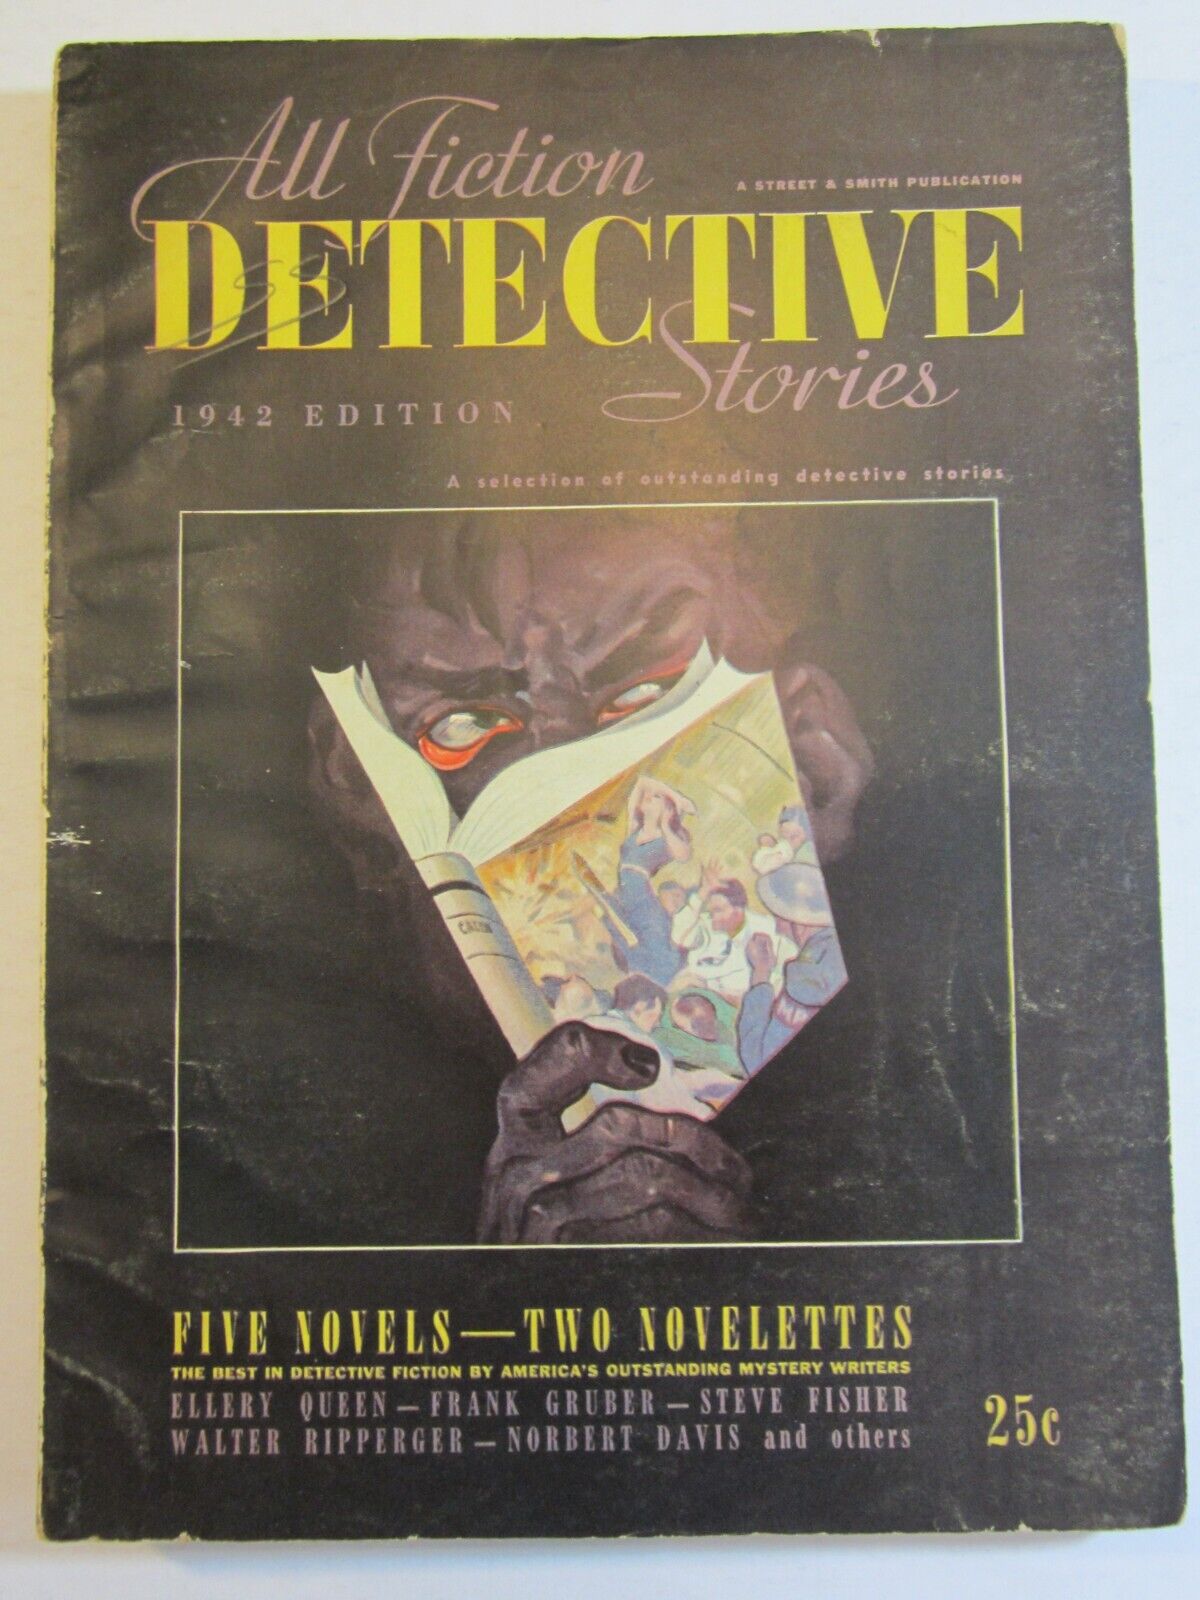 All Fiction Detective Stories 1942 Edition VG